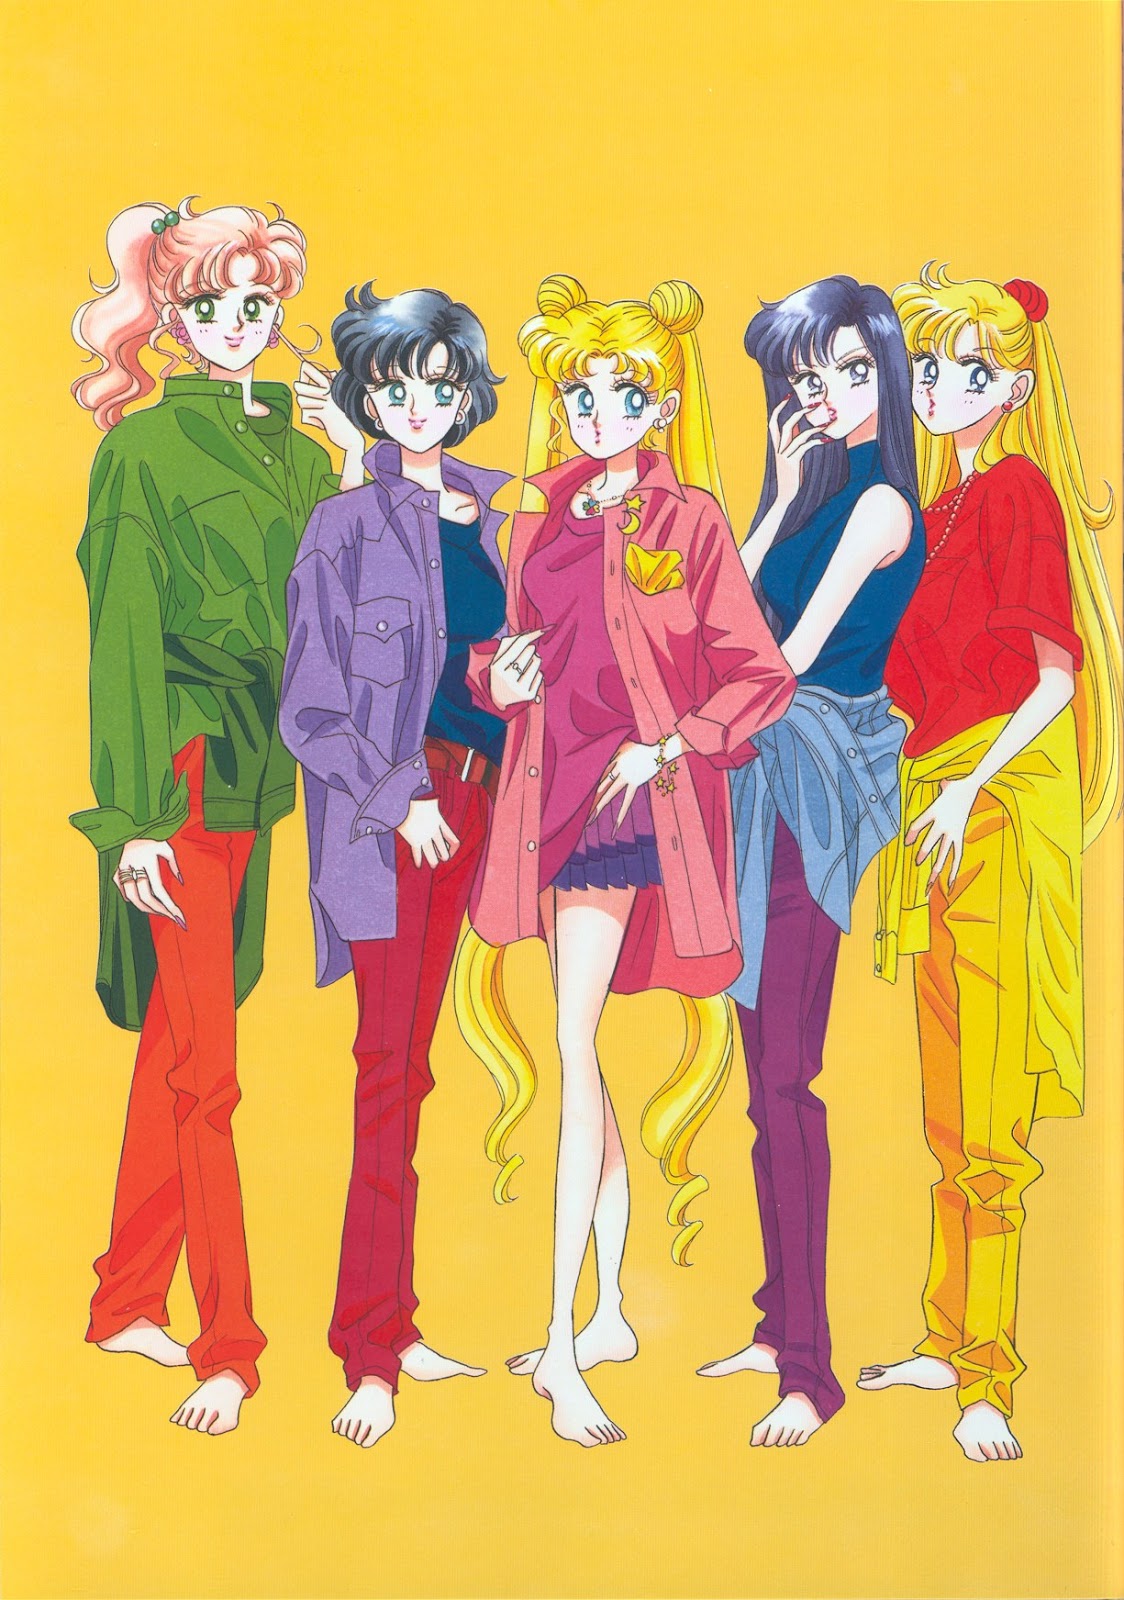 Anime Feet Sailor Moon Ami Mizuno promotional images and art